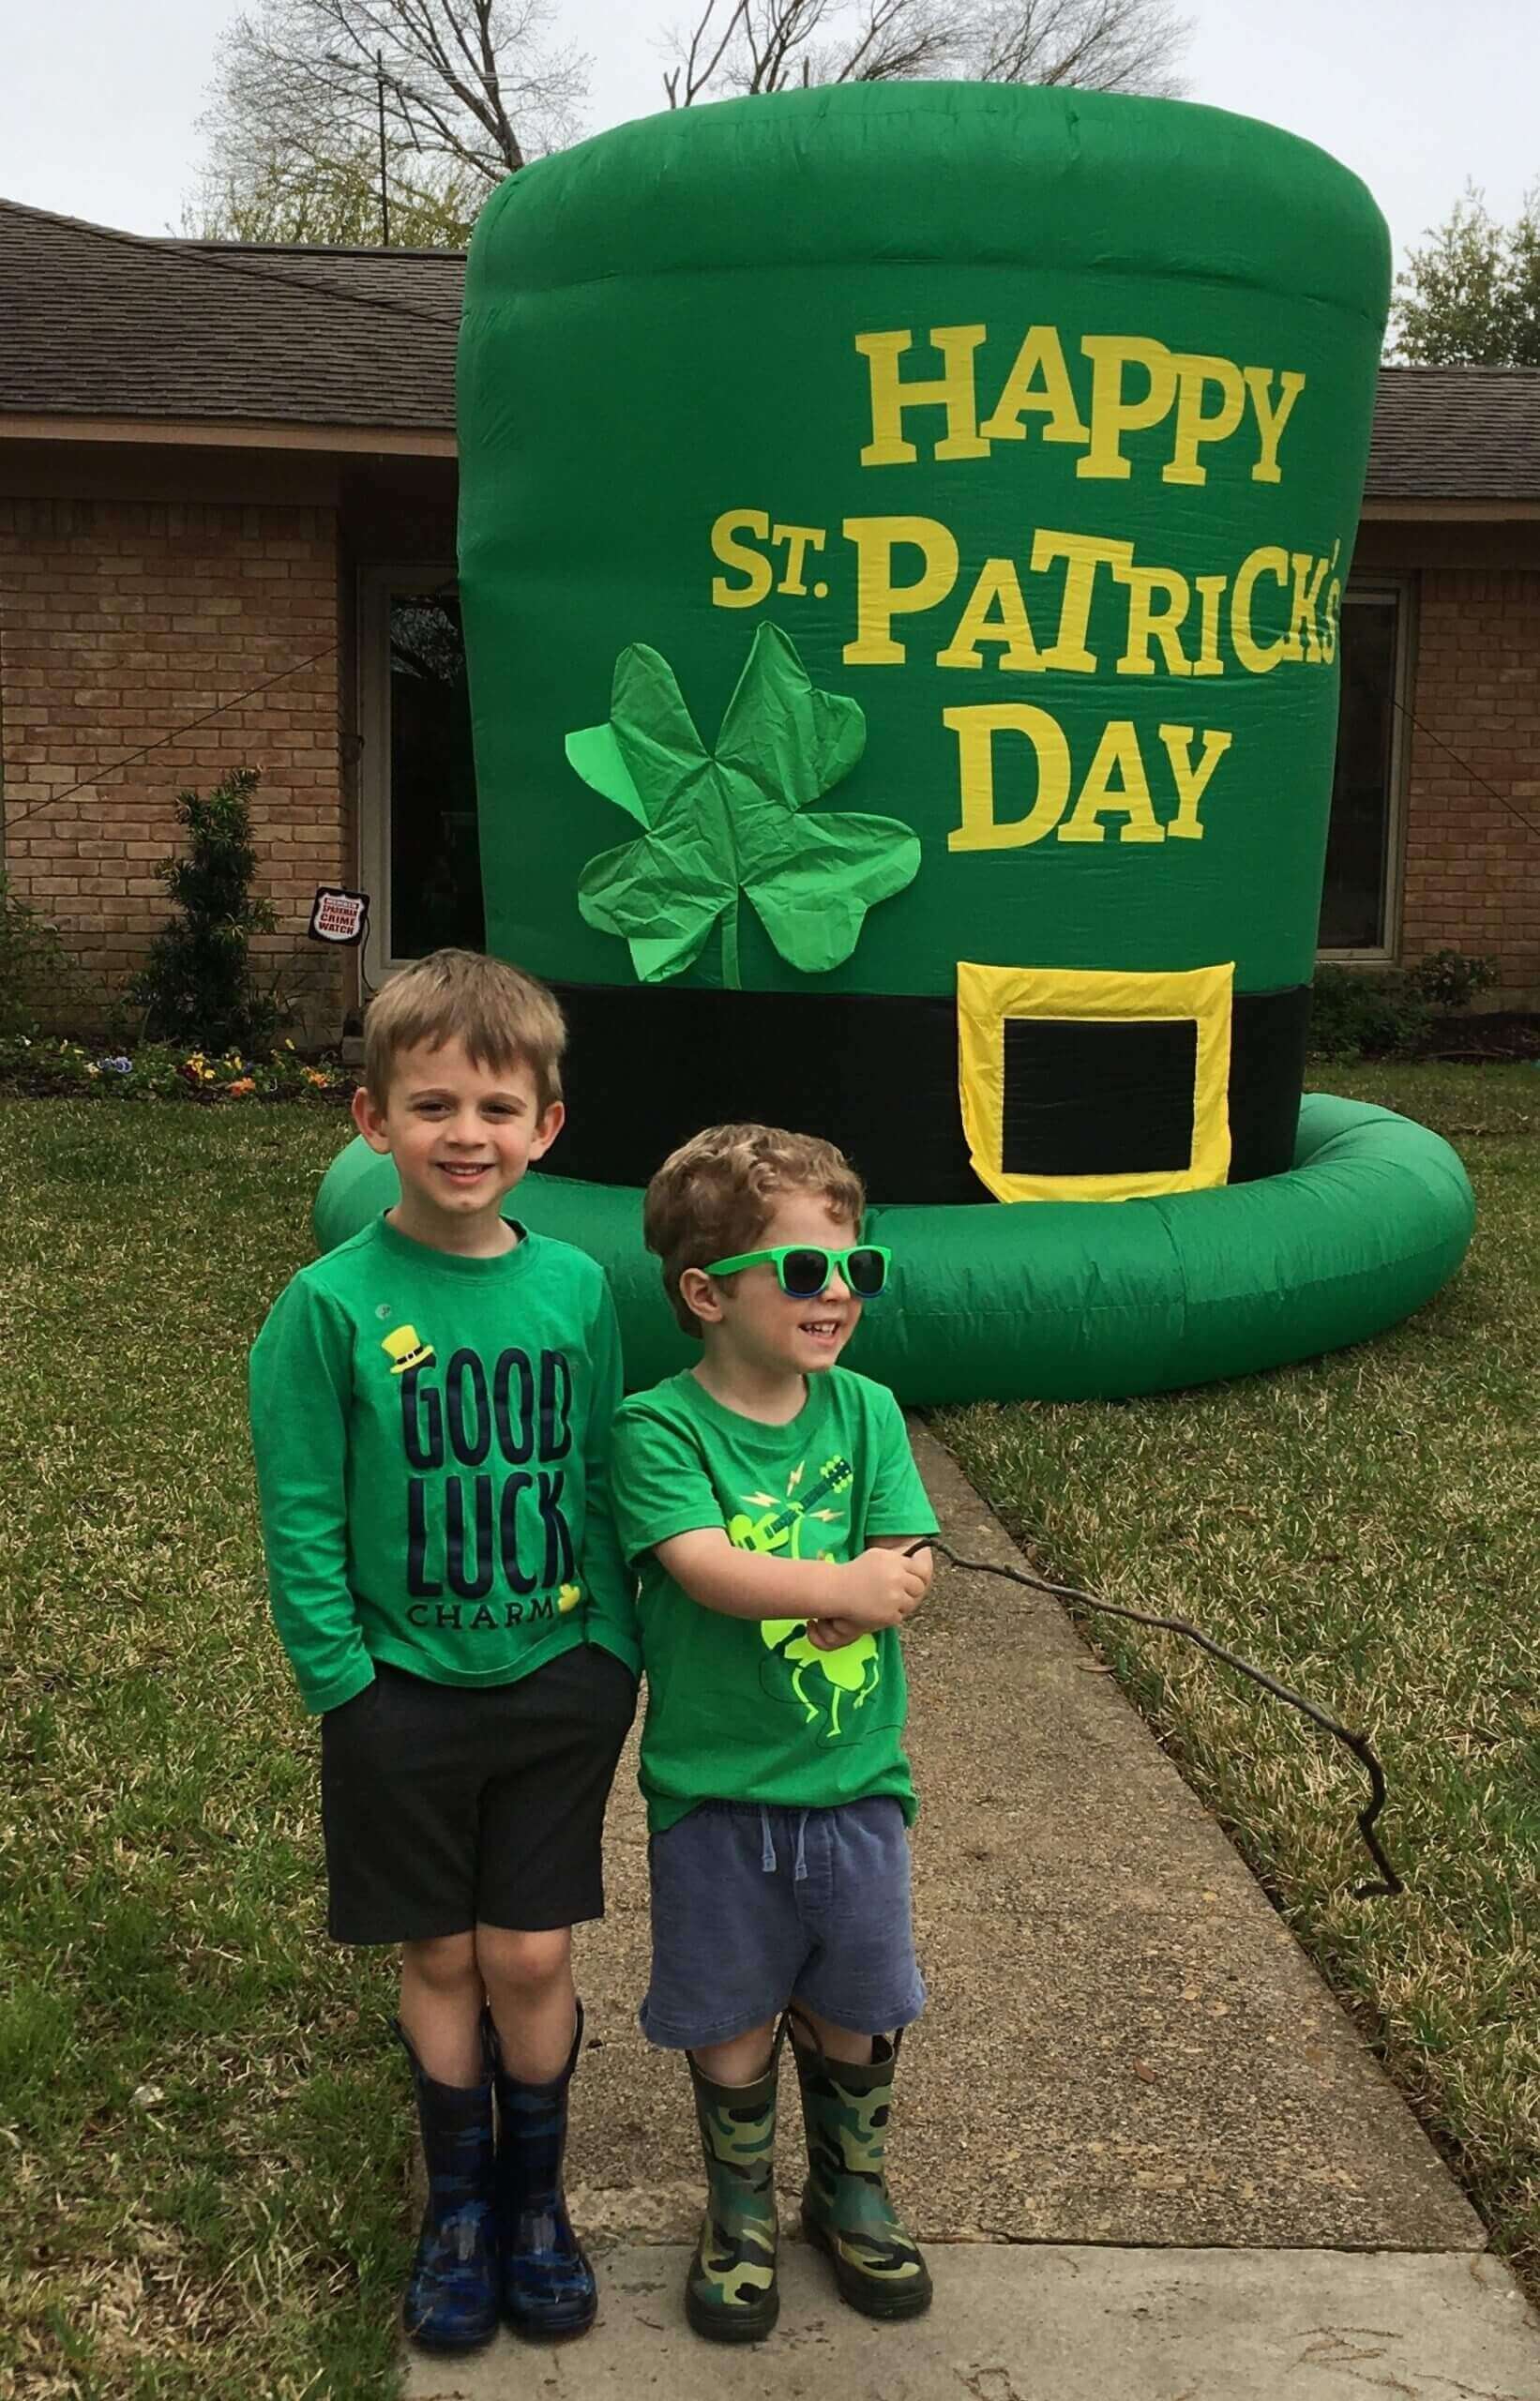 Two of my boys found this giant leprechaun hat on a neighborhood scavenger hunt.